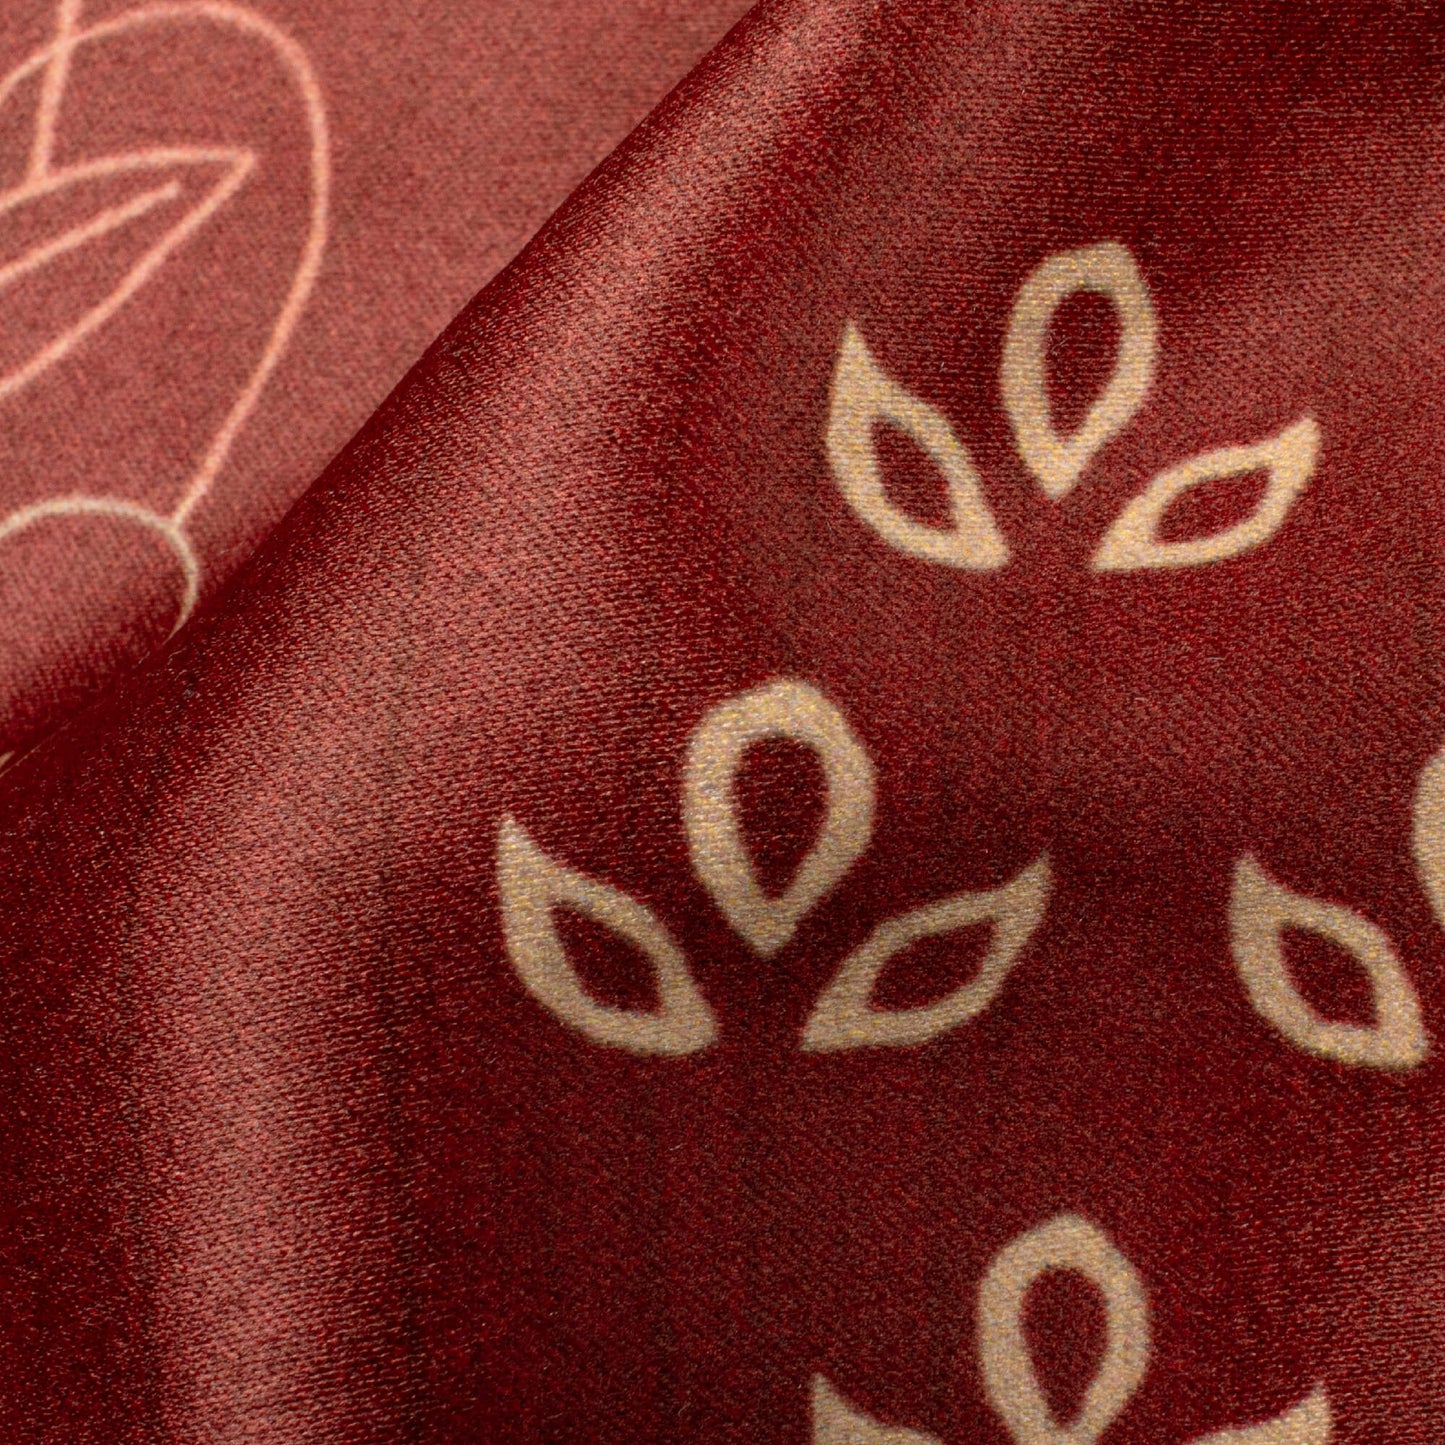 Vermillion Red And Beige Floral Pattern Digital Print Lush Satin Fabric